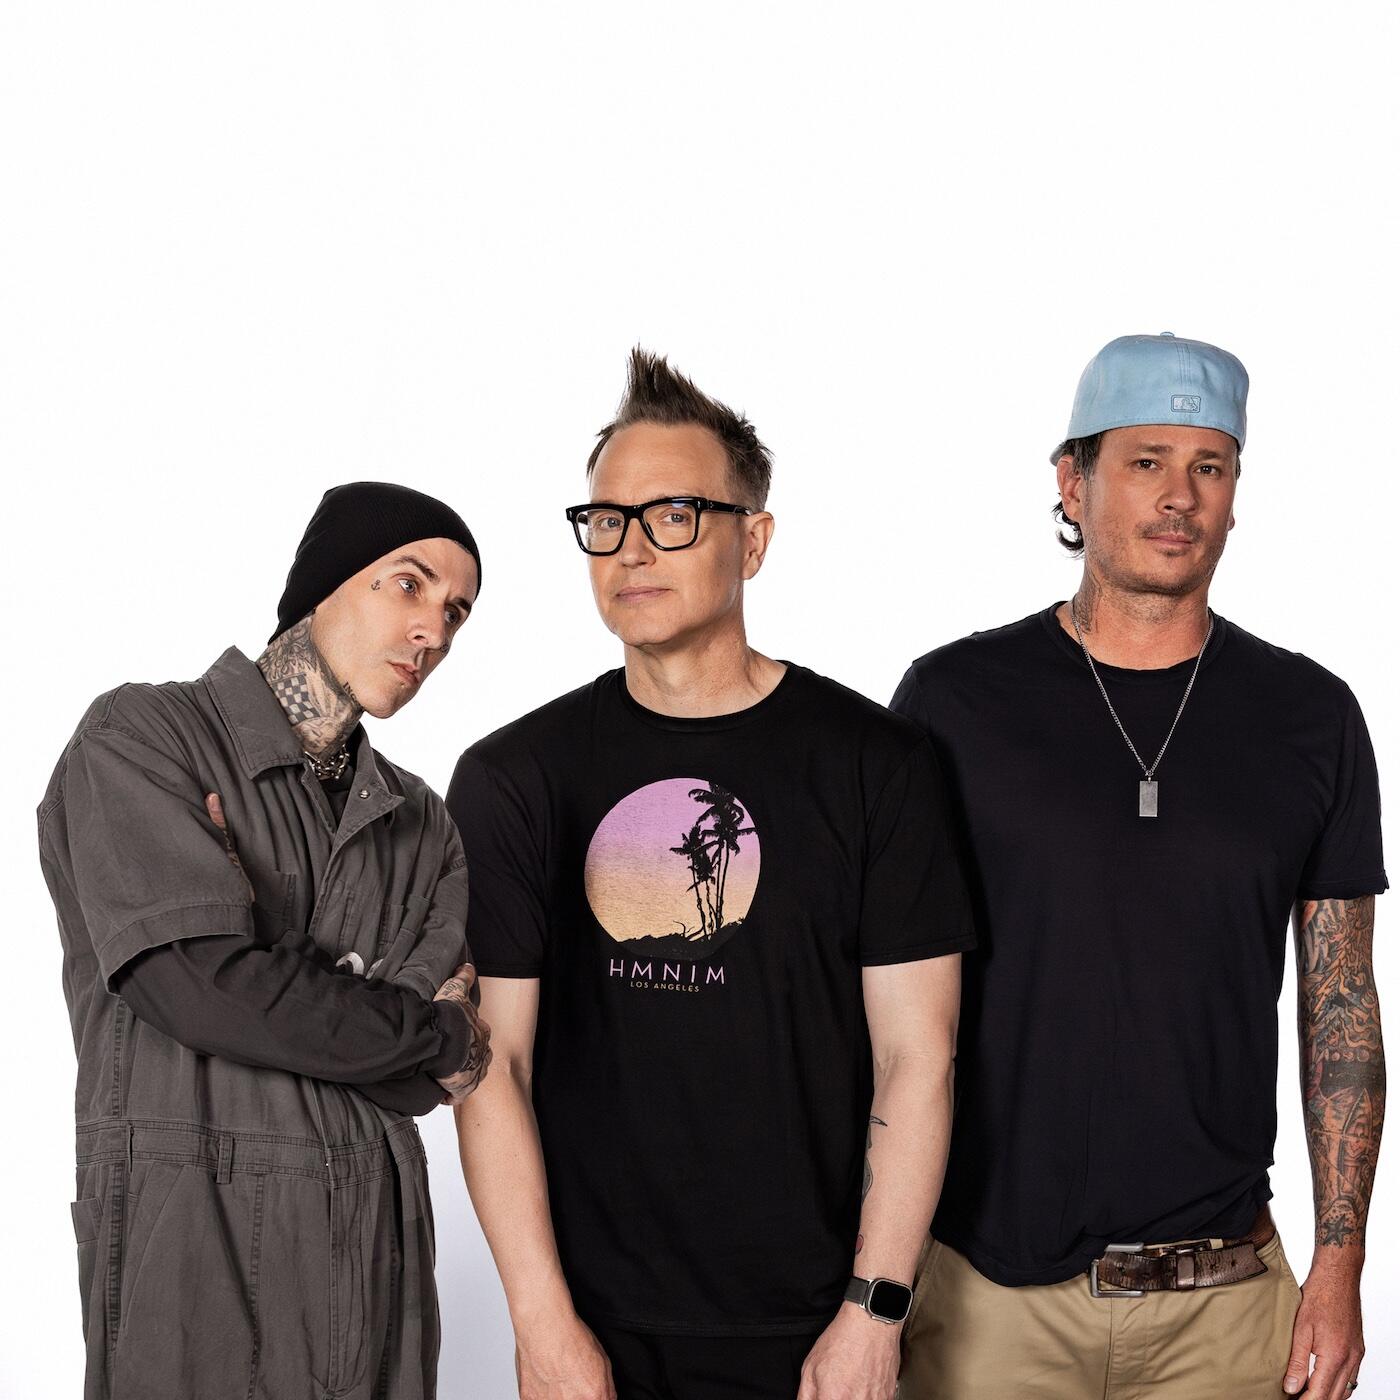 blink-182 Radio: Listen to Free Music & Get The Latest Info | iHeartRadio